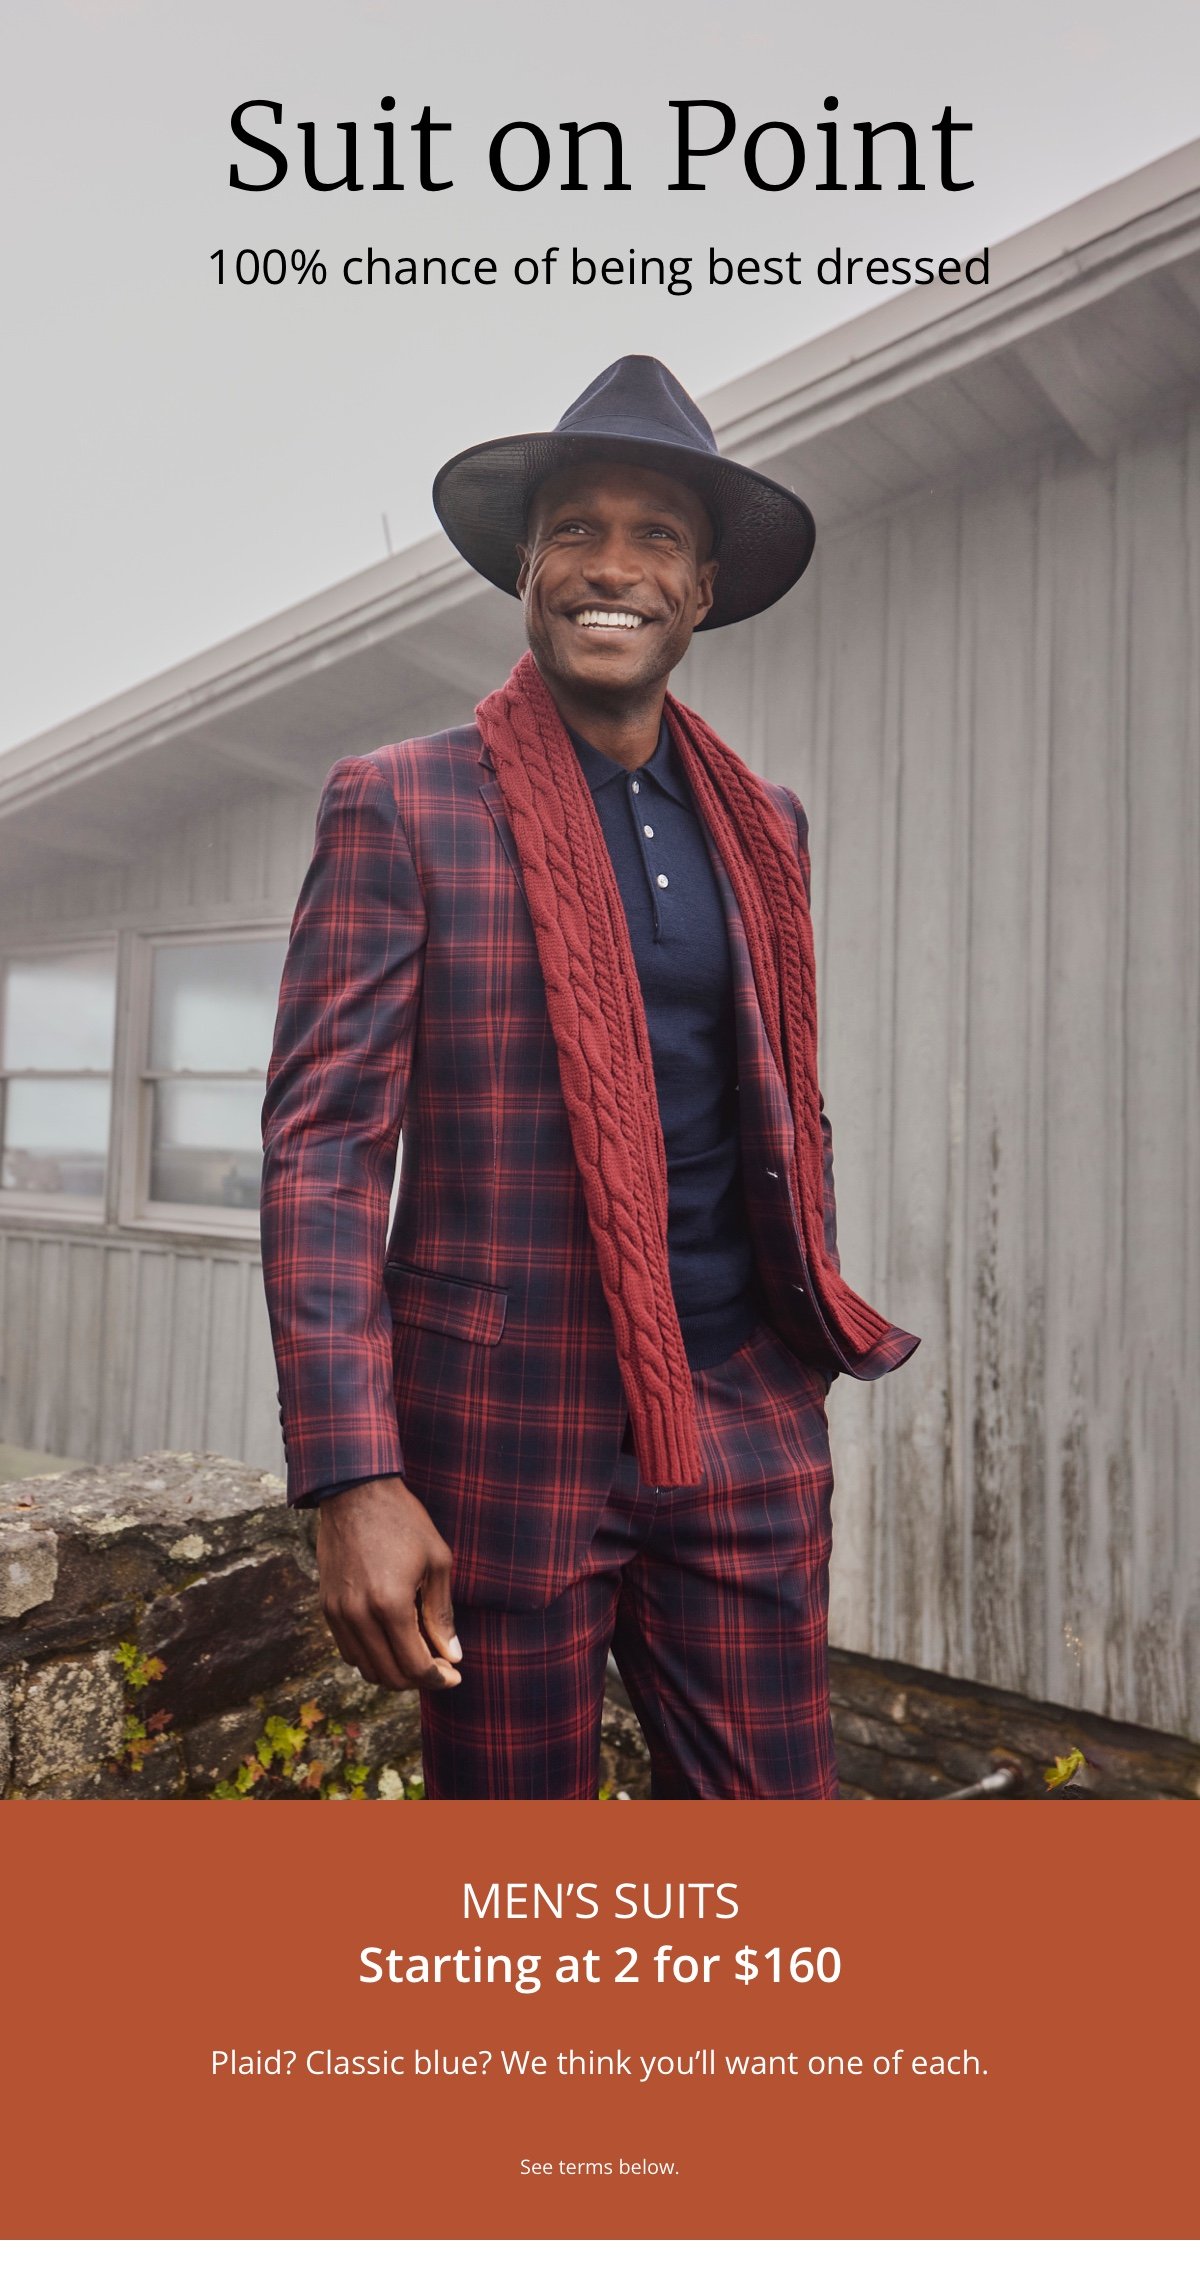 Suit on Point 100% chance of being best dressed. Men s Suits Starting at 2 for \\$160 Plaid? Classic blue? We think you ll want one of each. See terms below.